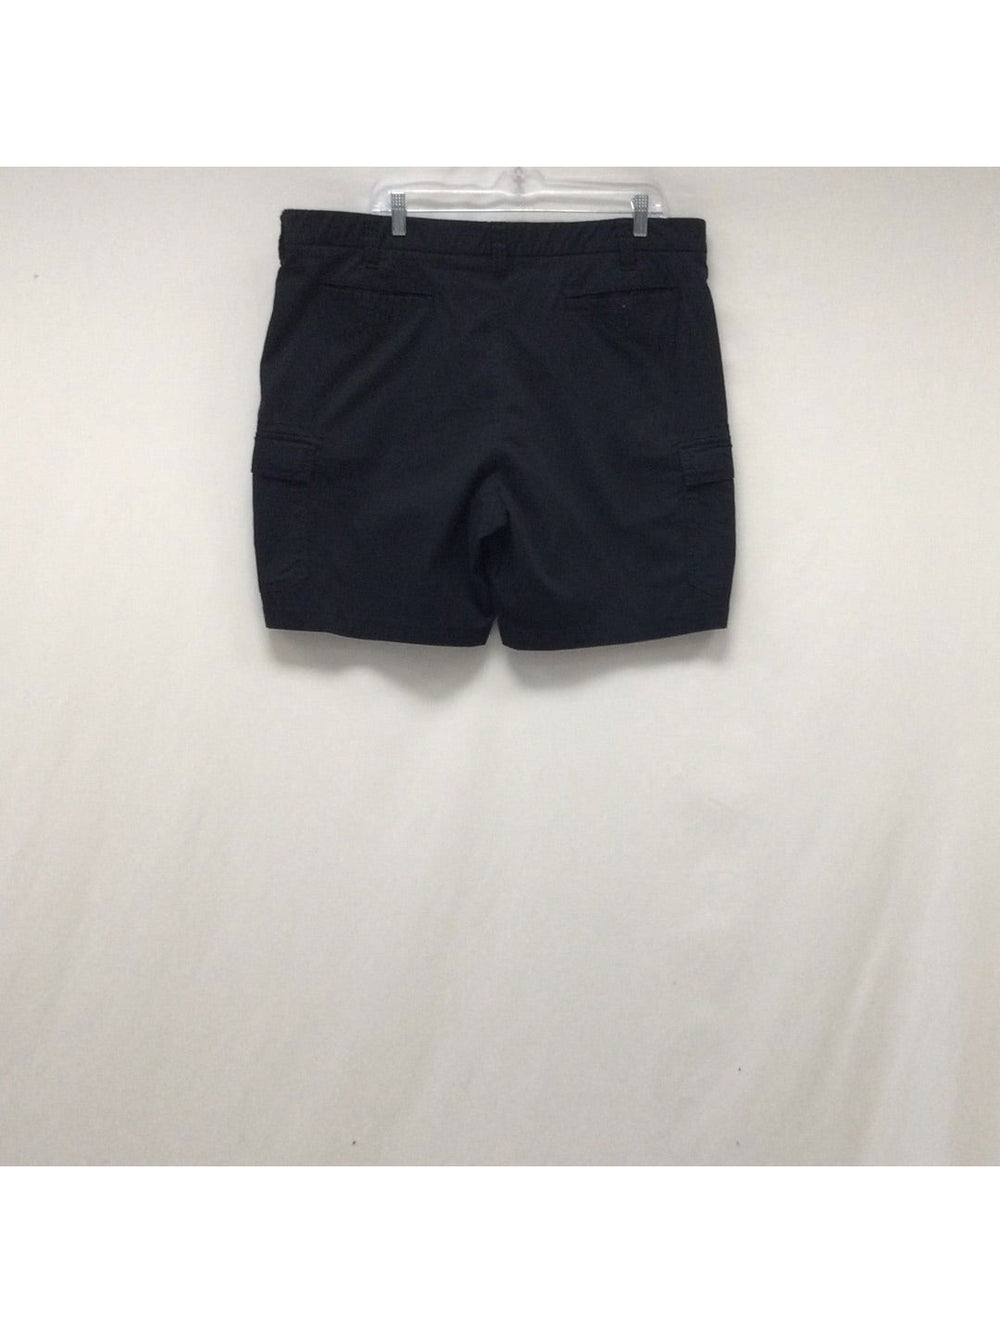 Croft & Barrow Men Black Shorts Size 40 - The Kennedy Collective Thrift - 